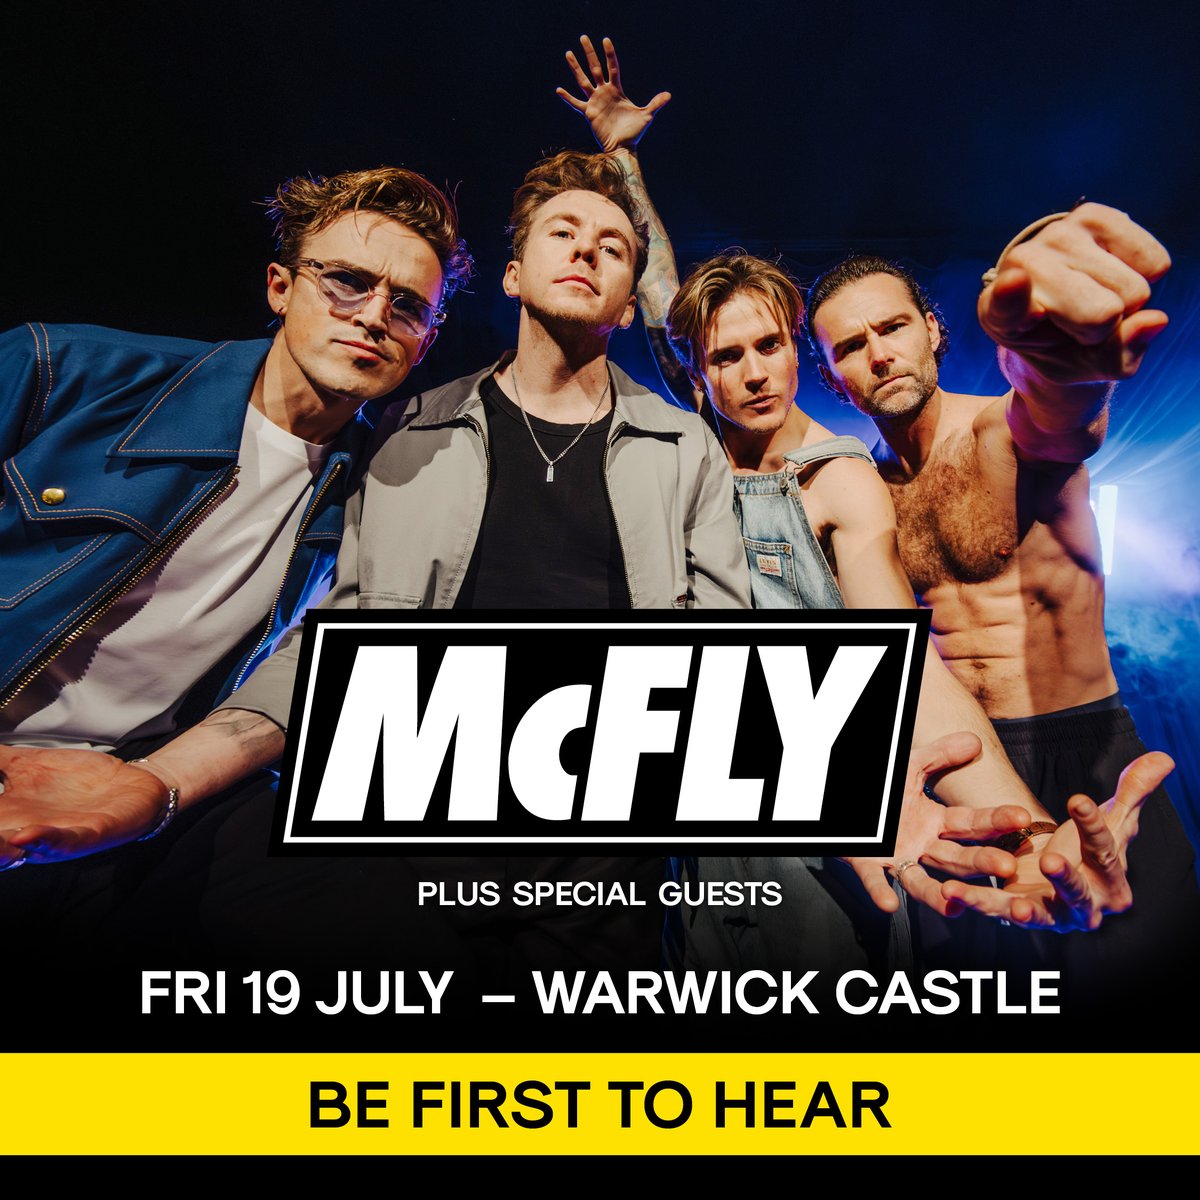 It’s All About You @mcflymusic 🎵 @warwickcastle 🏰 Fri 19 Jul ‘24! ☀️ Tickets expected to sell fast! 🎟️ 💨 Sign up for exclusive pre-sale access at the link below! #McFly #WarwickCastle #LiveAtWarwickCastle eepurl.com/iLDicQ